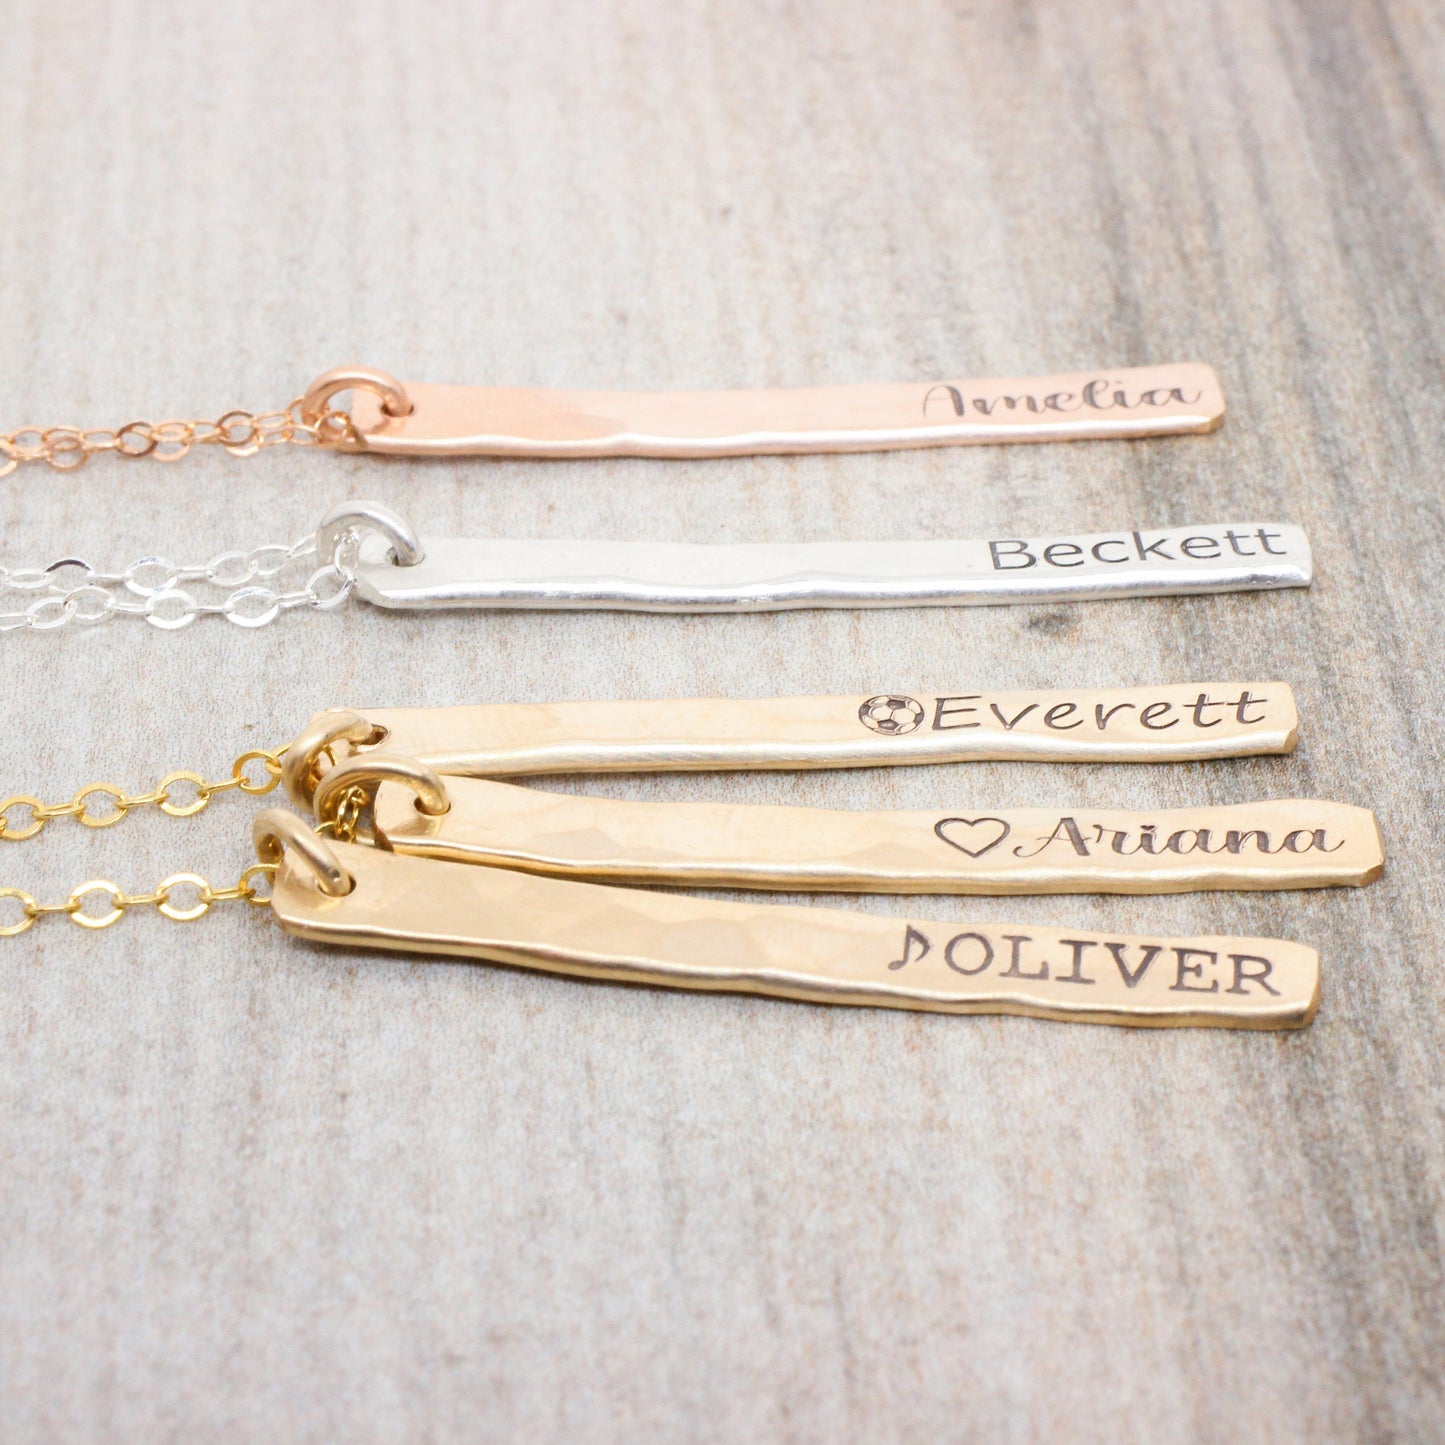 Engraved Bar Necklace in 14k Gold Filled, 14K Rose Gold Filled, or Sterling Silver // Personalized Initial Name Necklace // Bridesmaid Gift